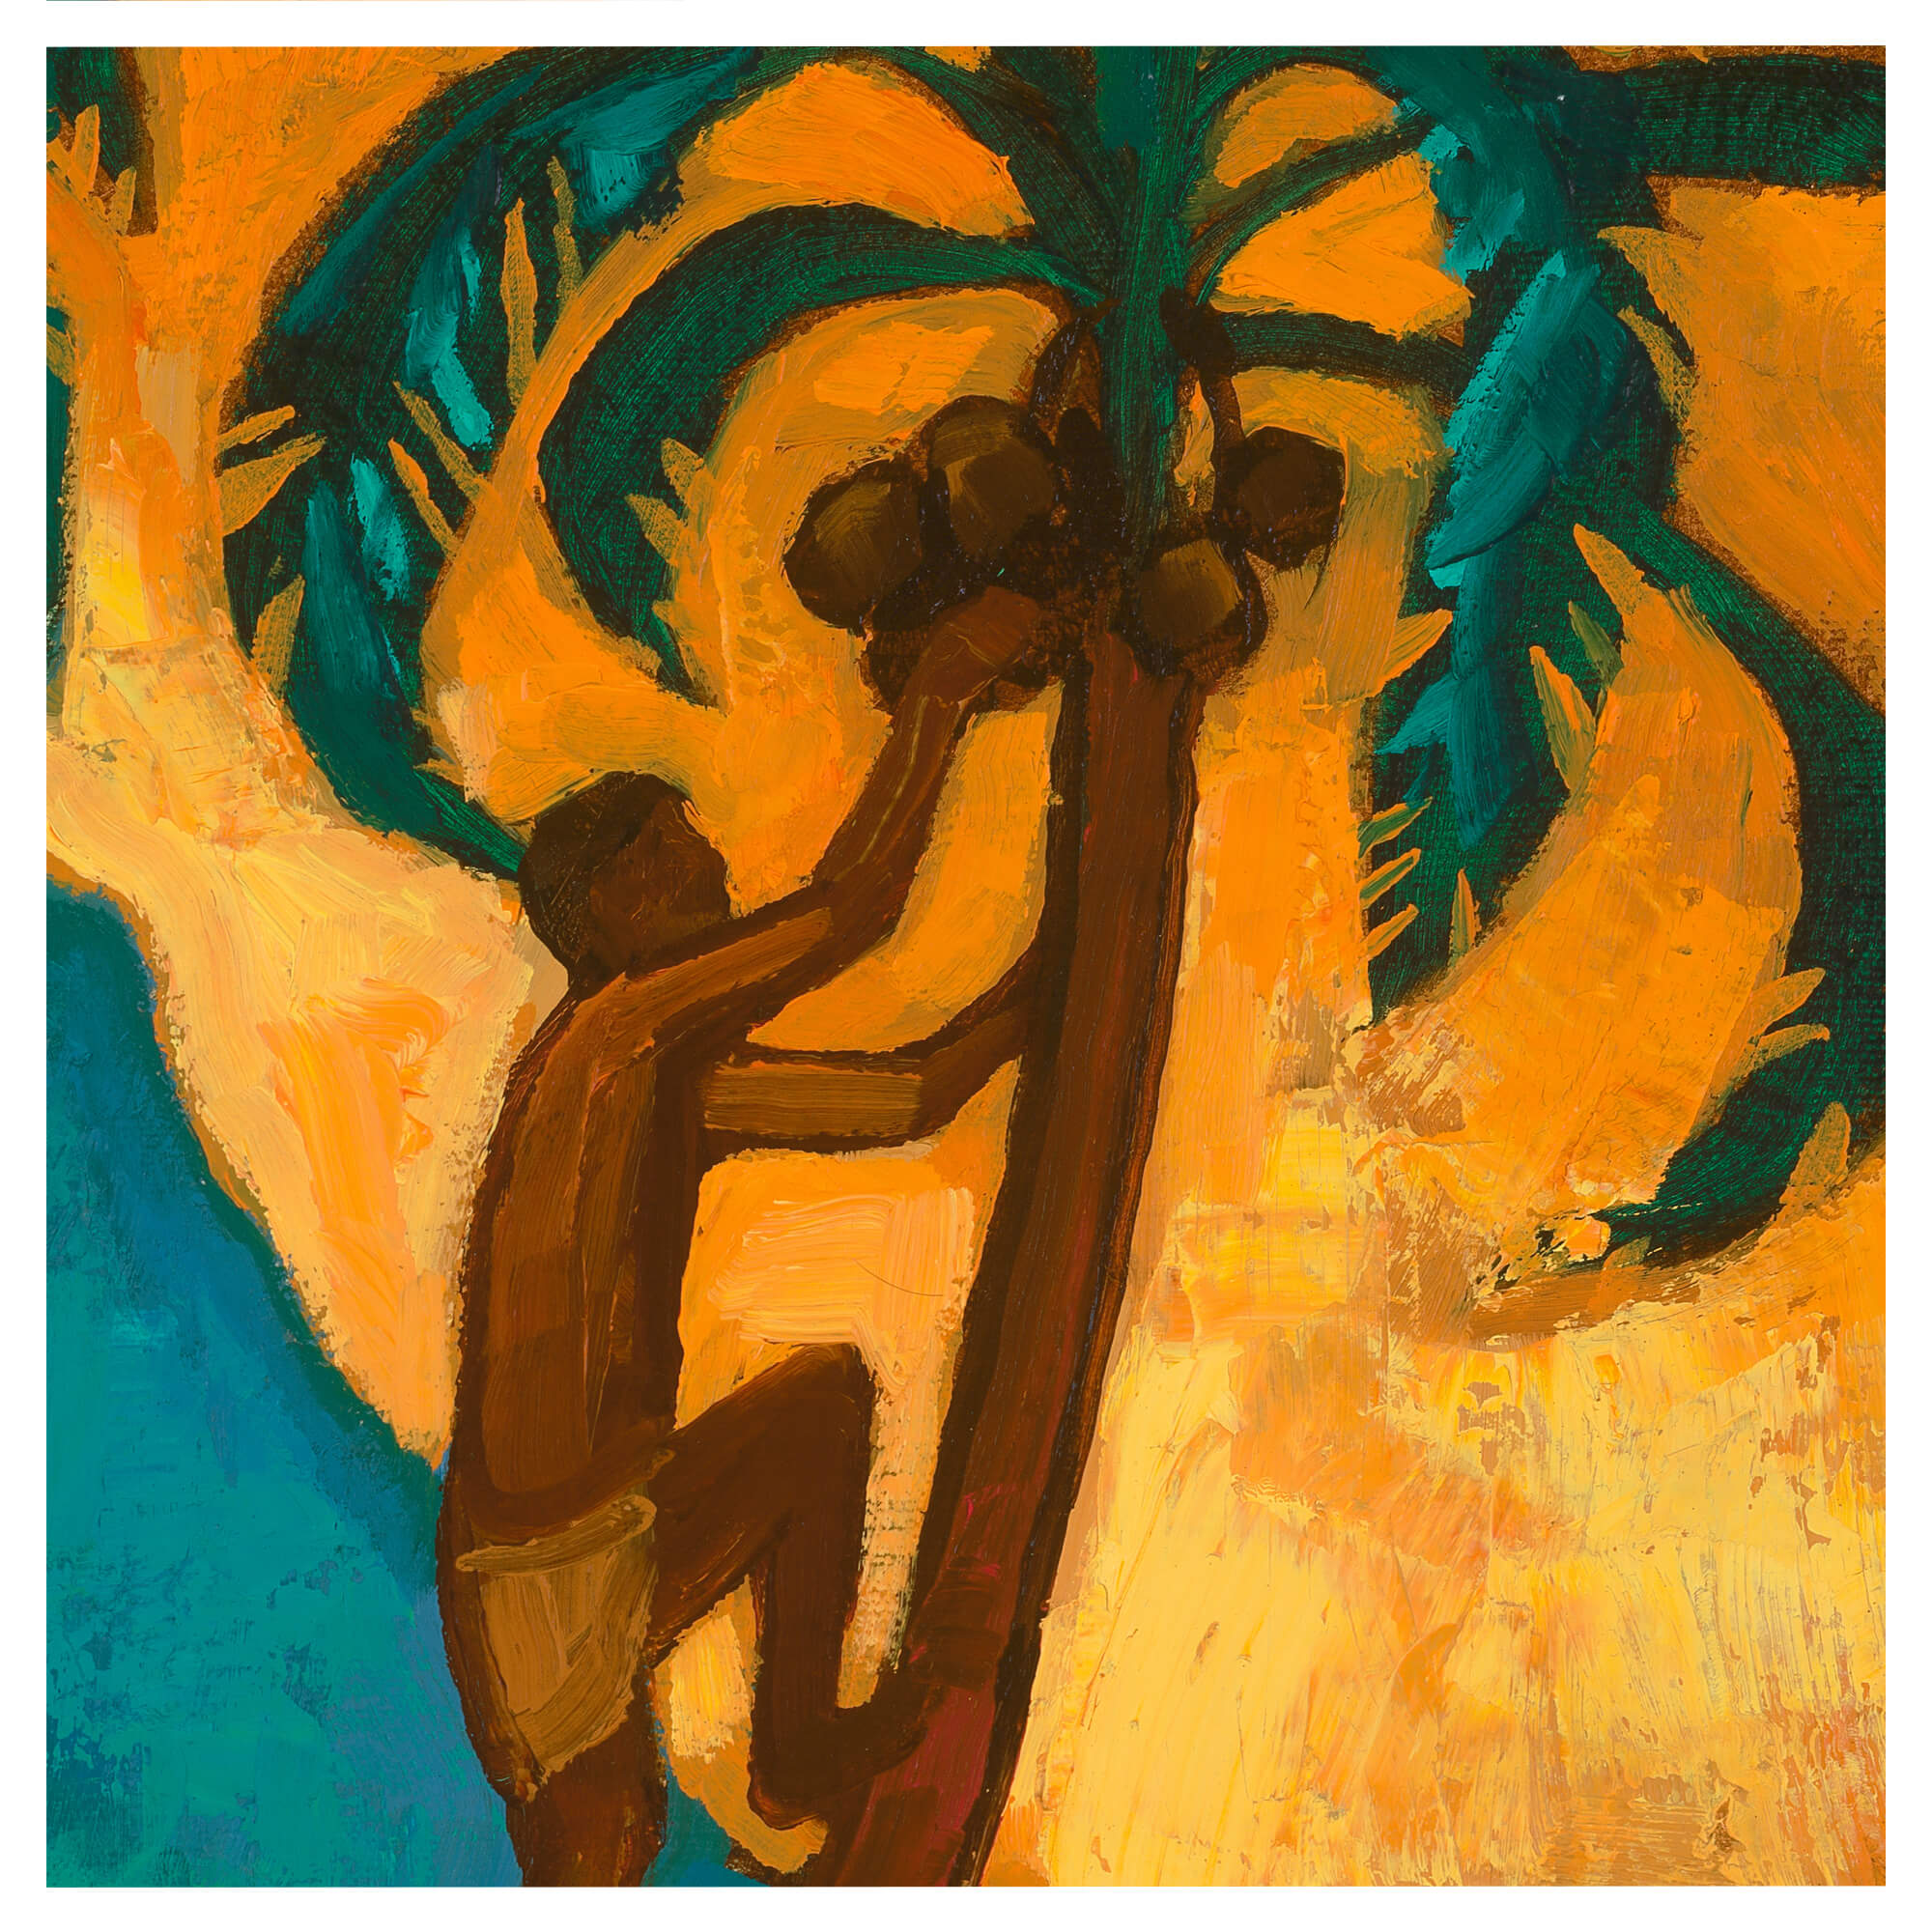 A man climbing a coconut tree by Hawaii artist Colin Redican